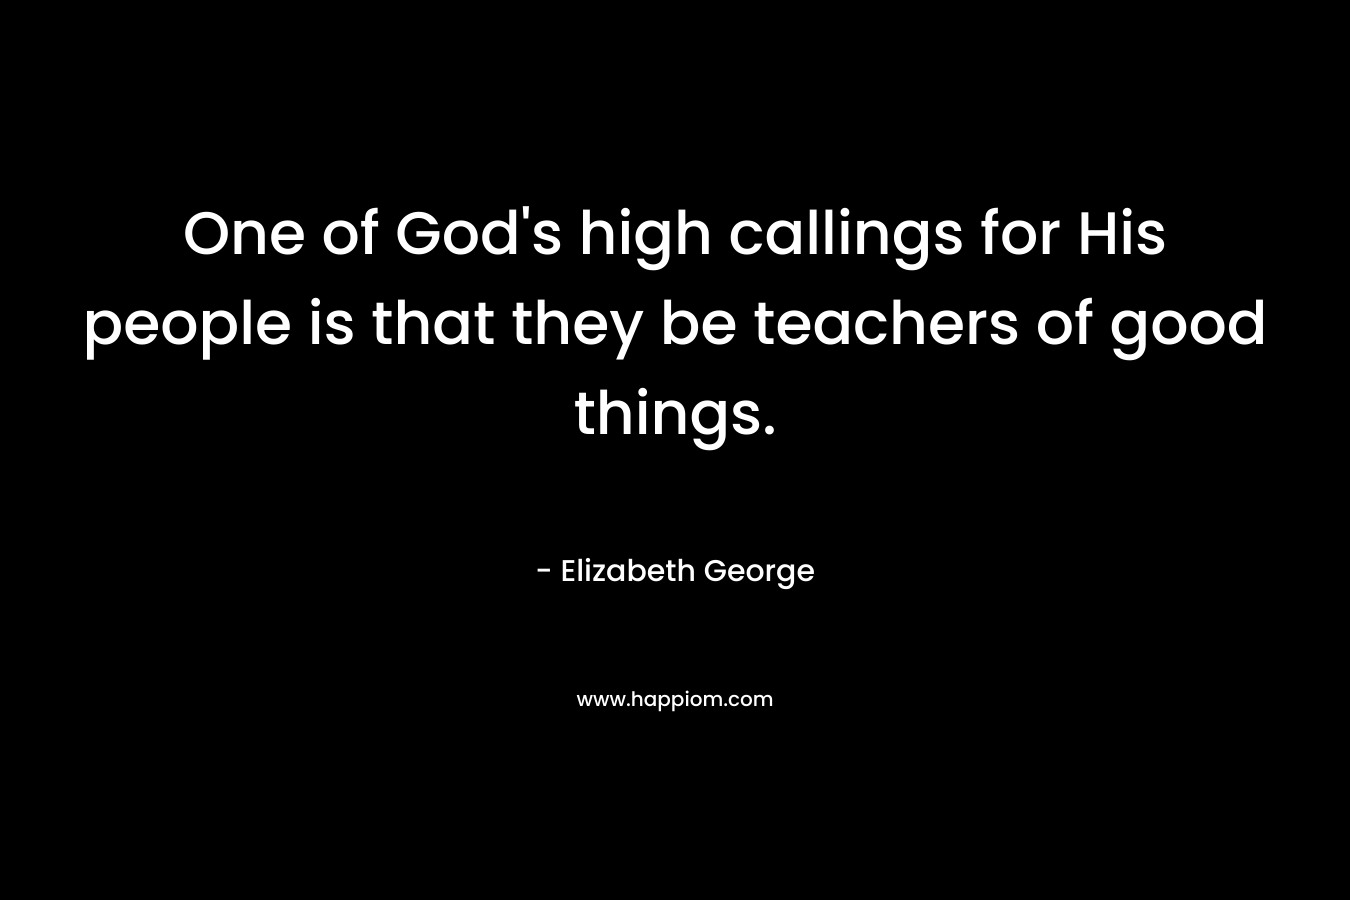 One of God's high callings for His people is that they be teachers of good things.